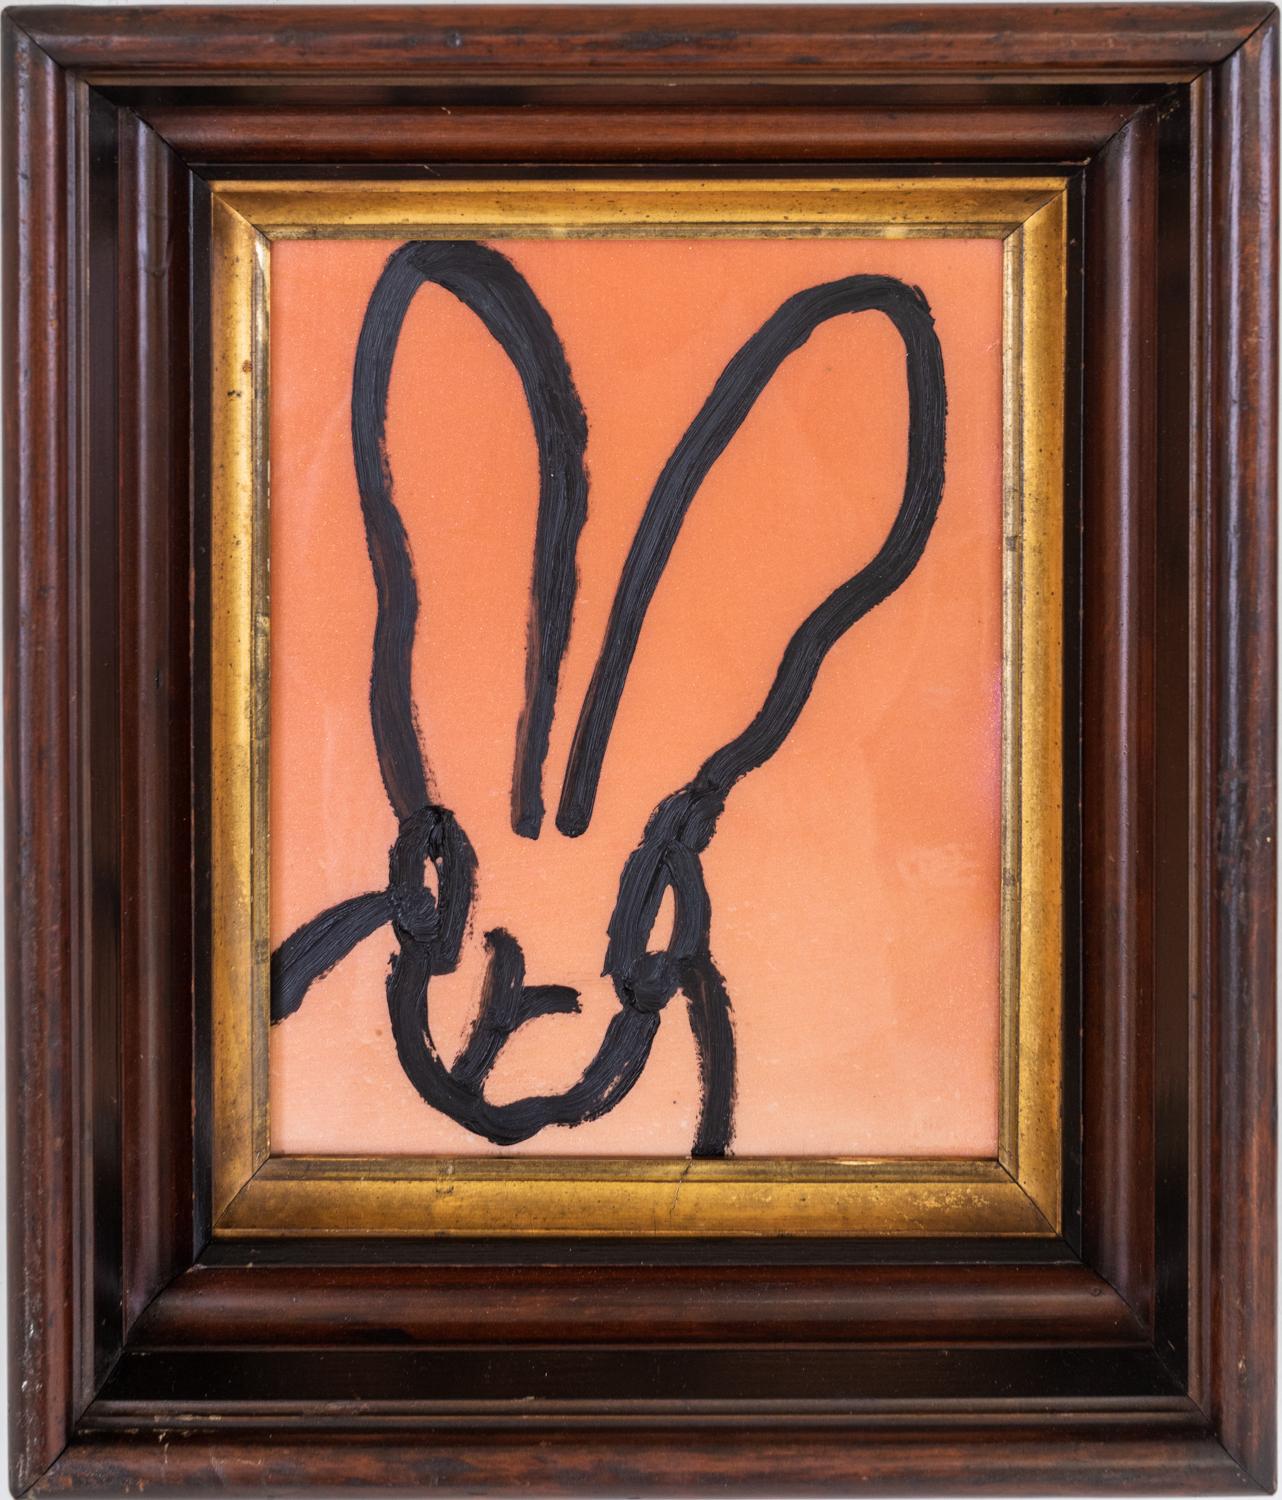 Hunt Slonem Animal Painting - Coppersmith "Bunny Painting" Original Oil Painting in Vintage Frame